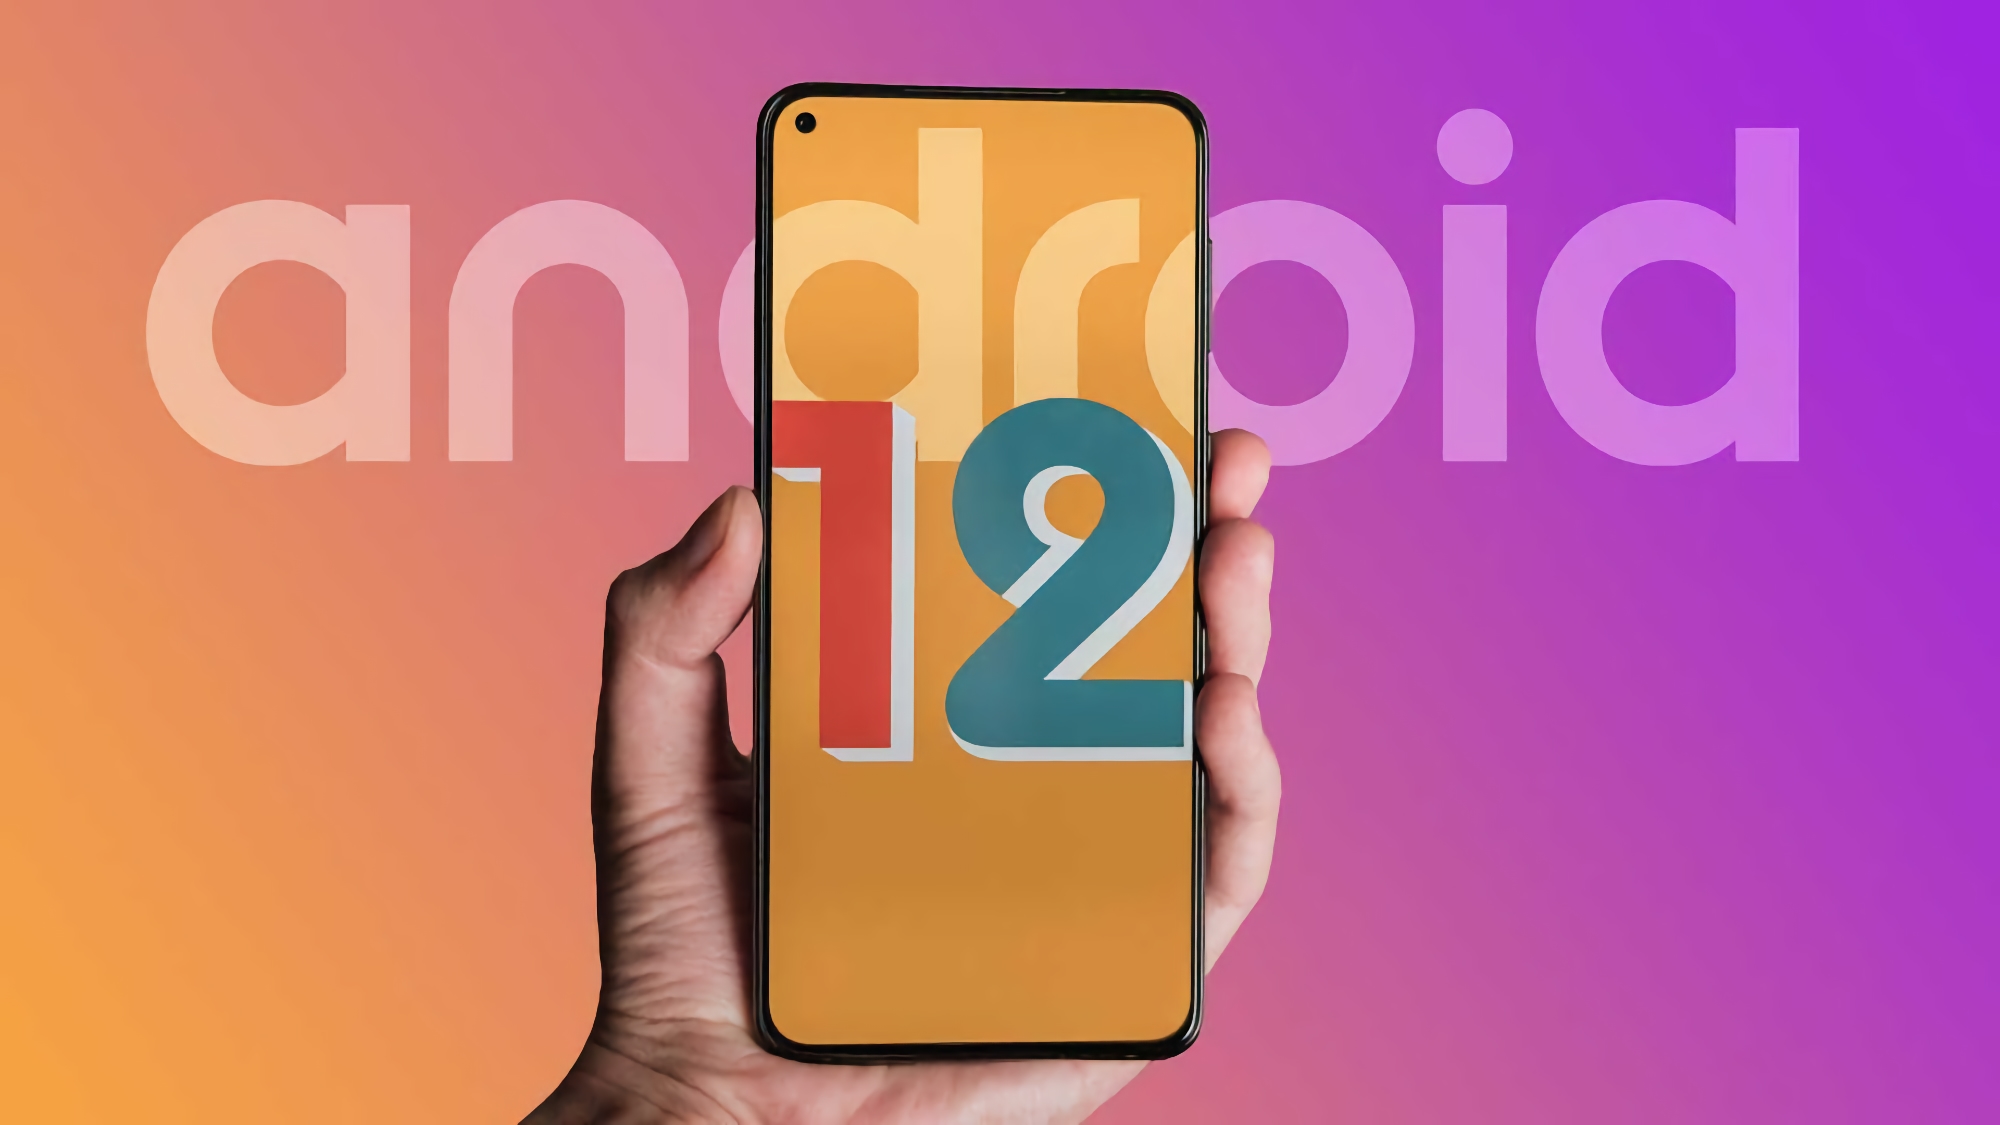 Xiaomi Mi 11 received a beta version of Android 12 with MIUI 12.5 shell